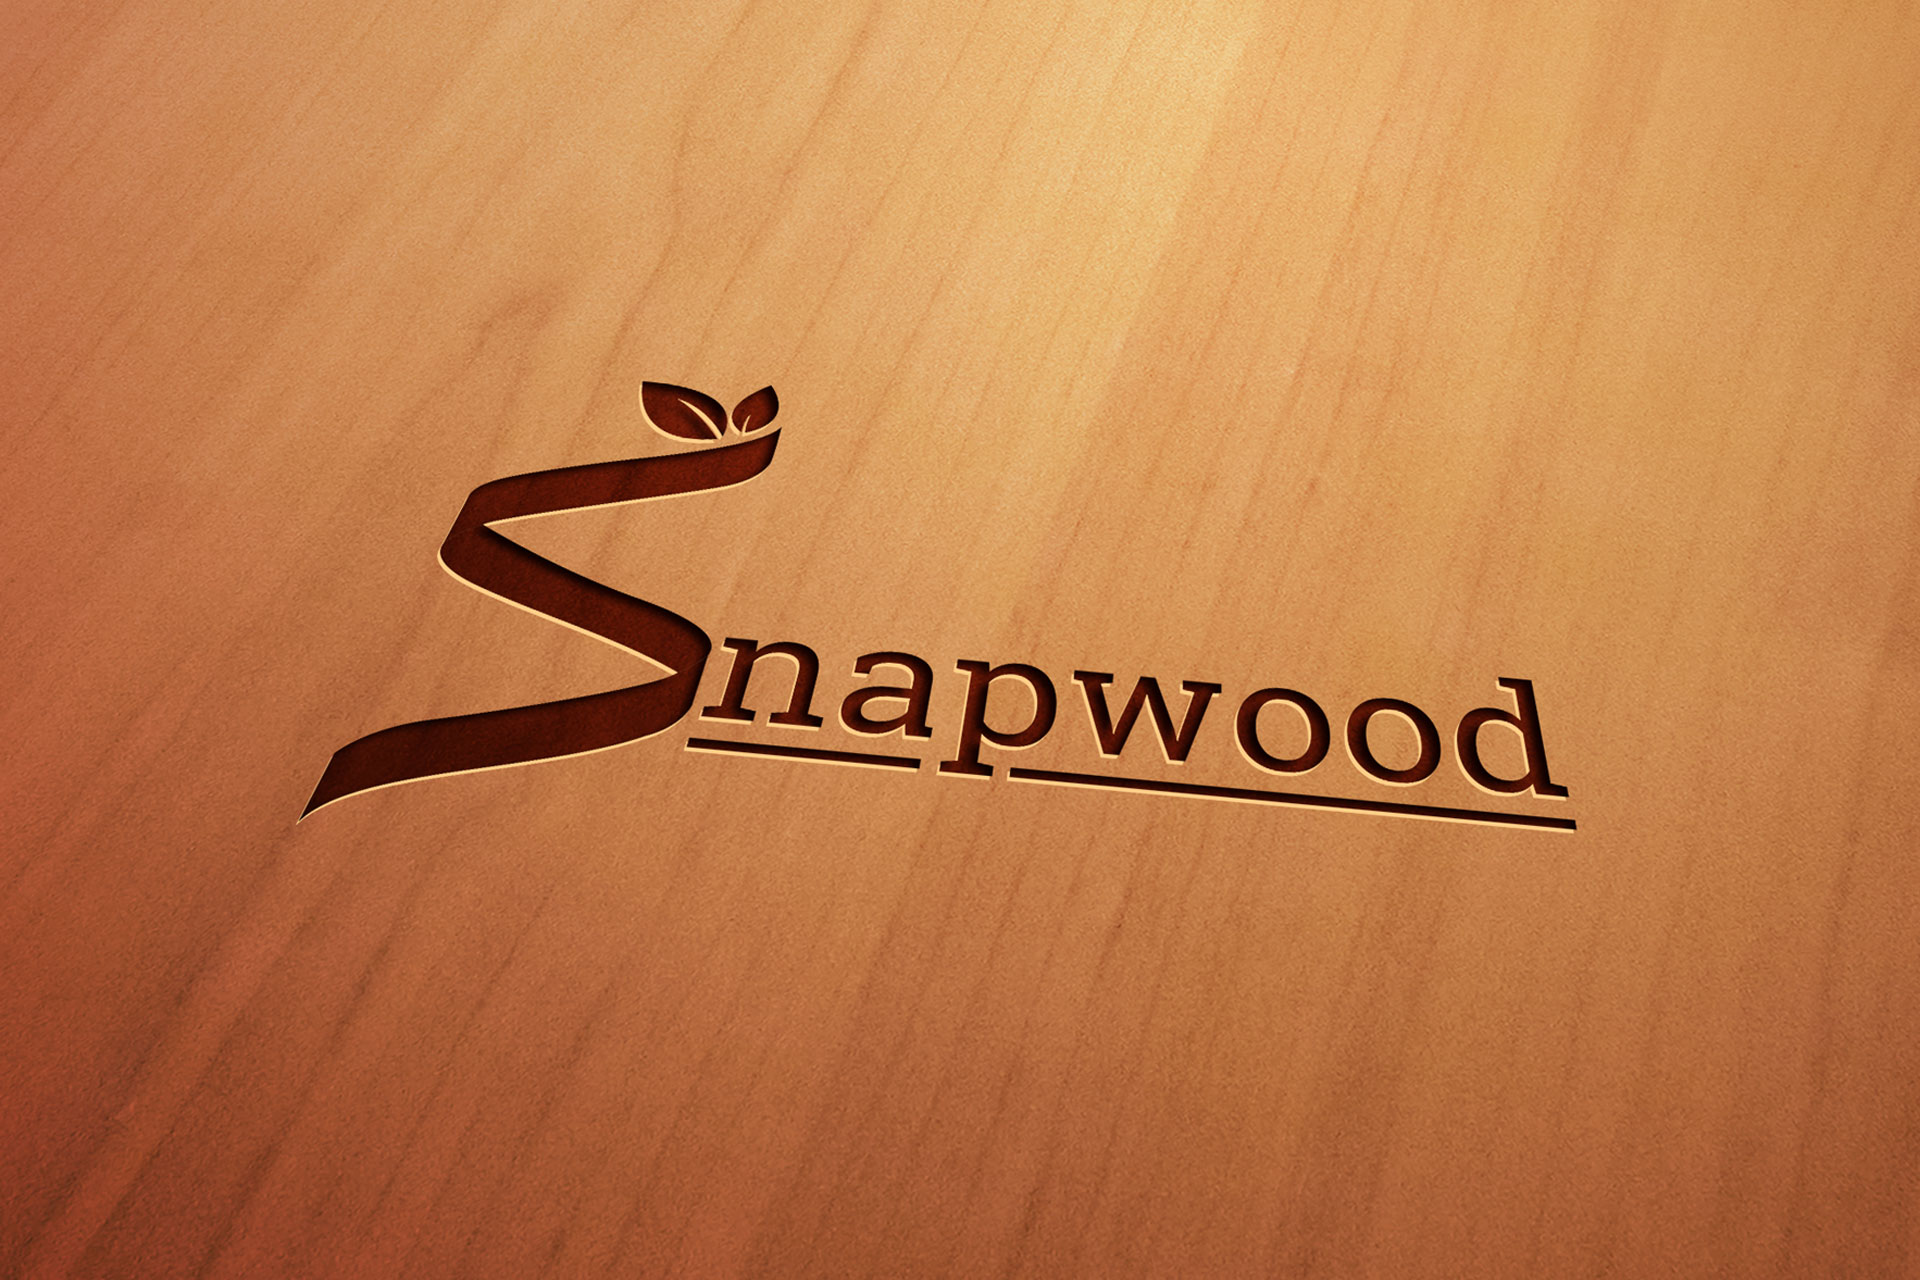 Snapwood is a furniture manufacturing brand that specializes in making sofa, dressing tables, beds, etc.